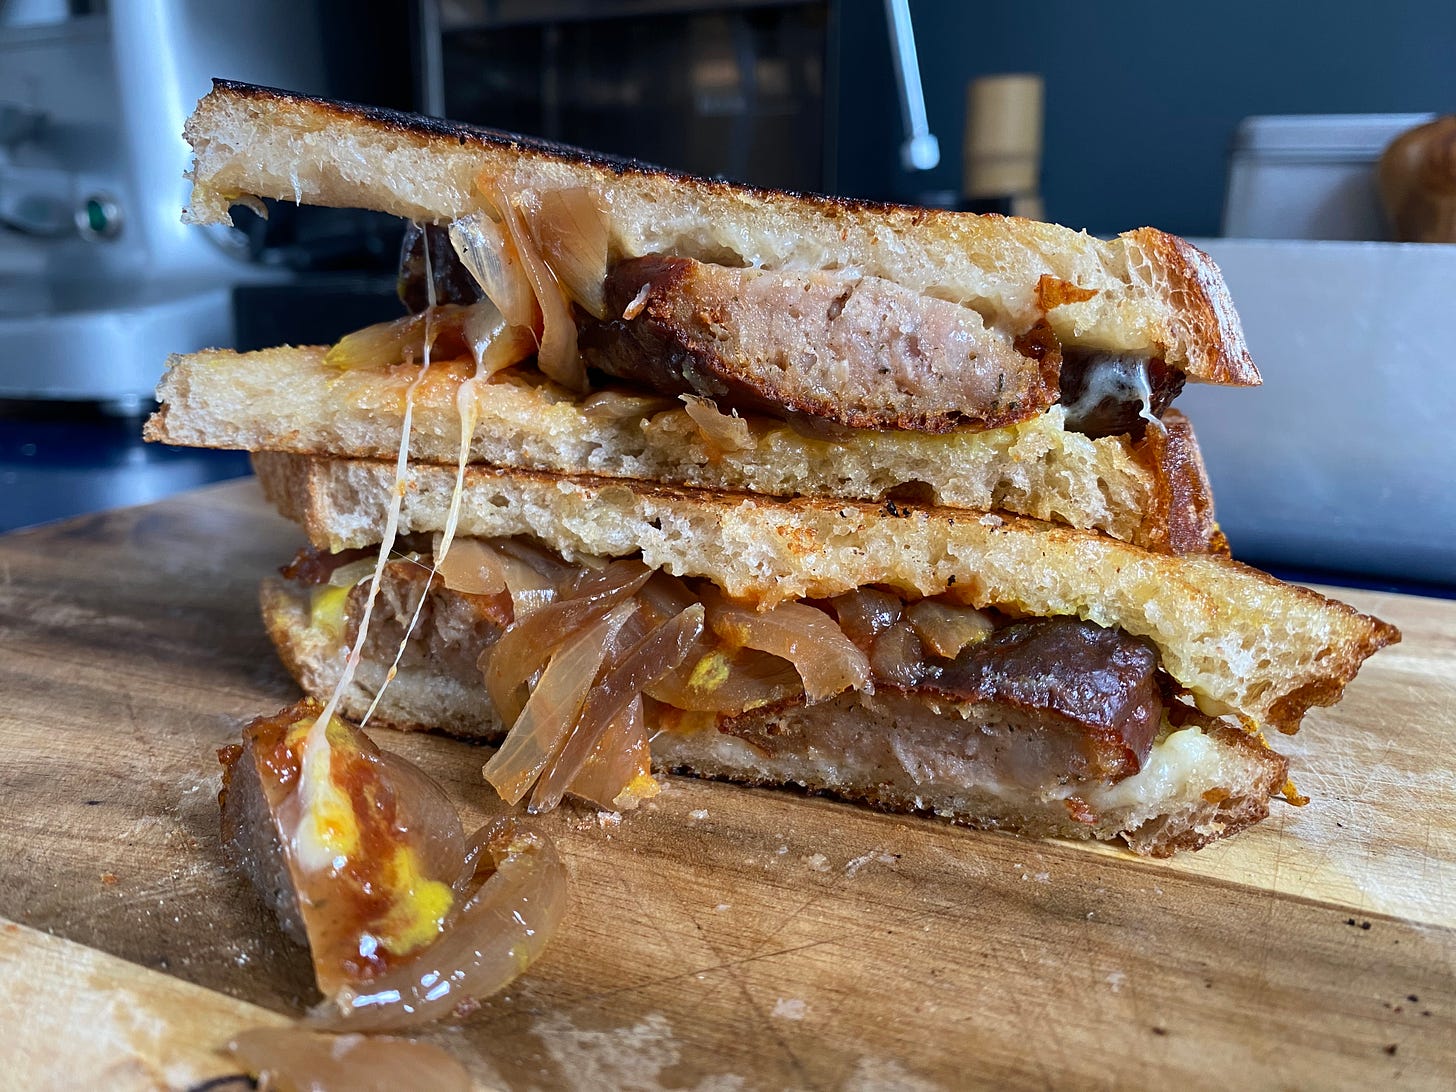 Sausage, onion and mustard sandwich on a wooden chopping board